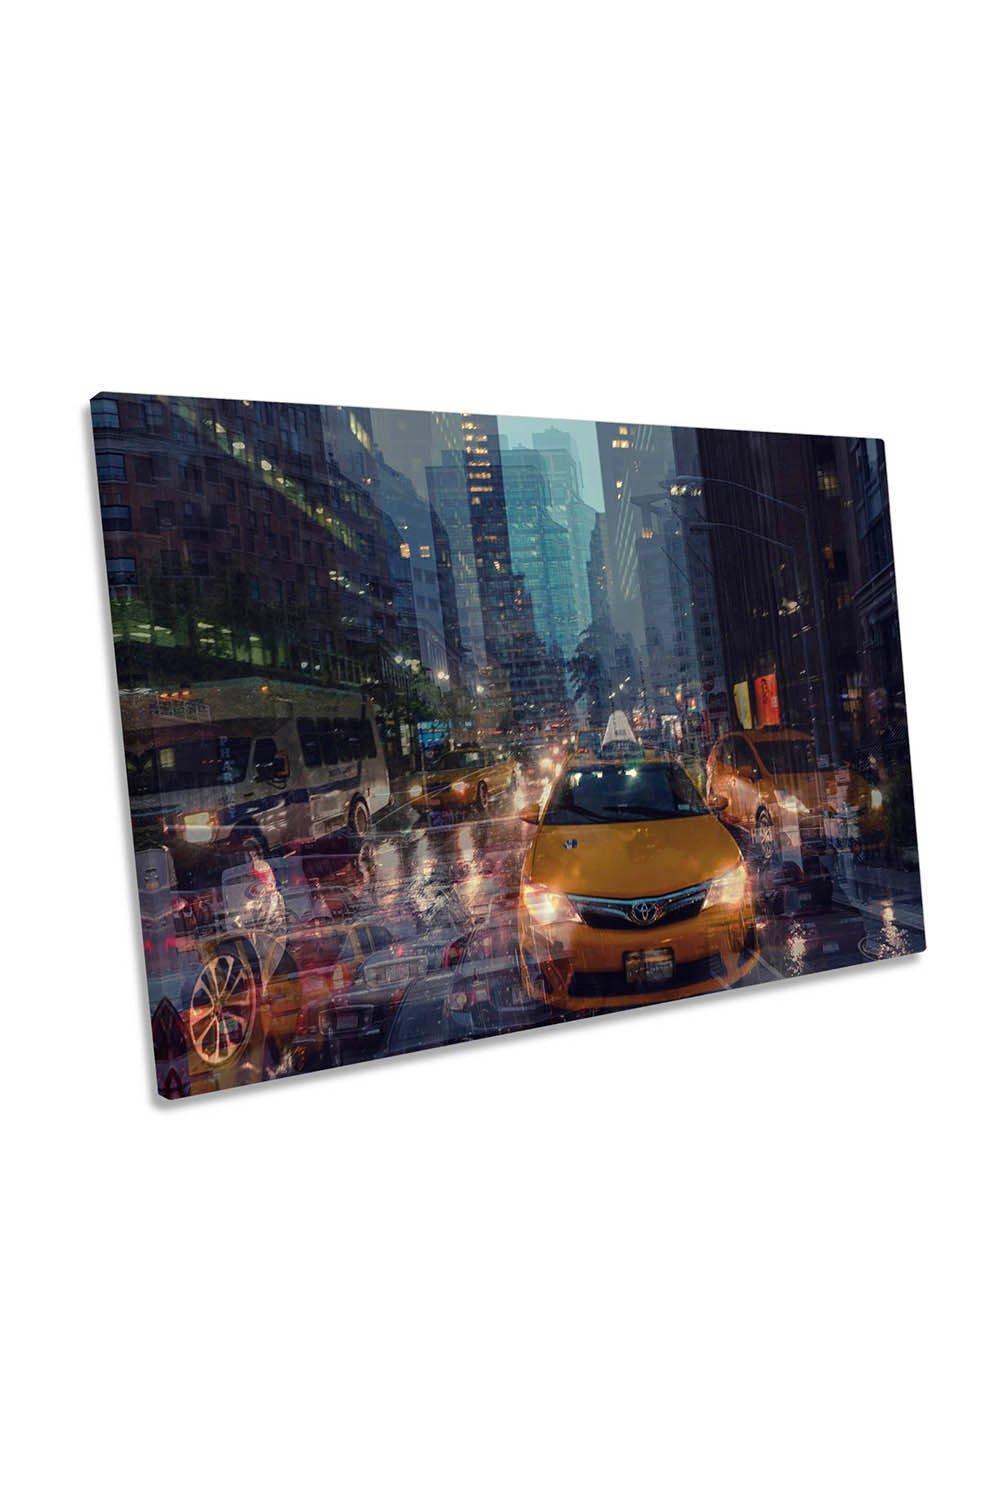 New York City Taxi Cab Busy Streets Canvas Wall Art Picture Print